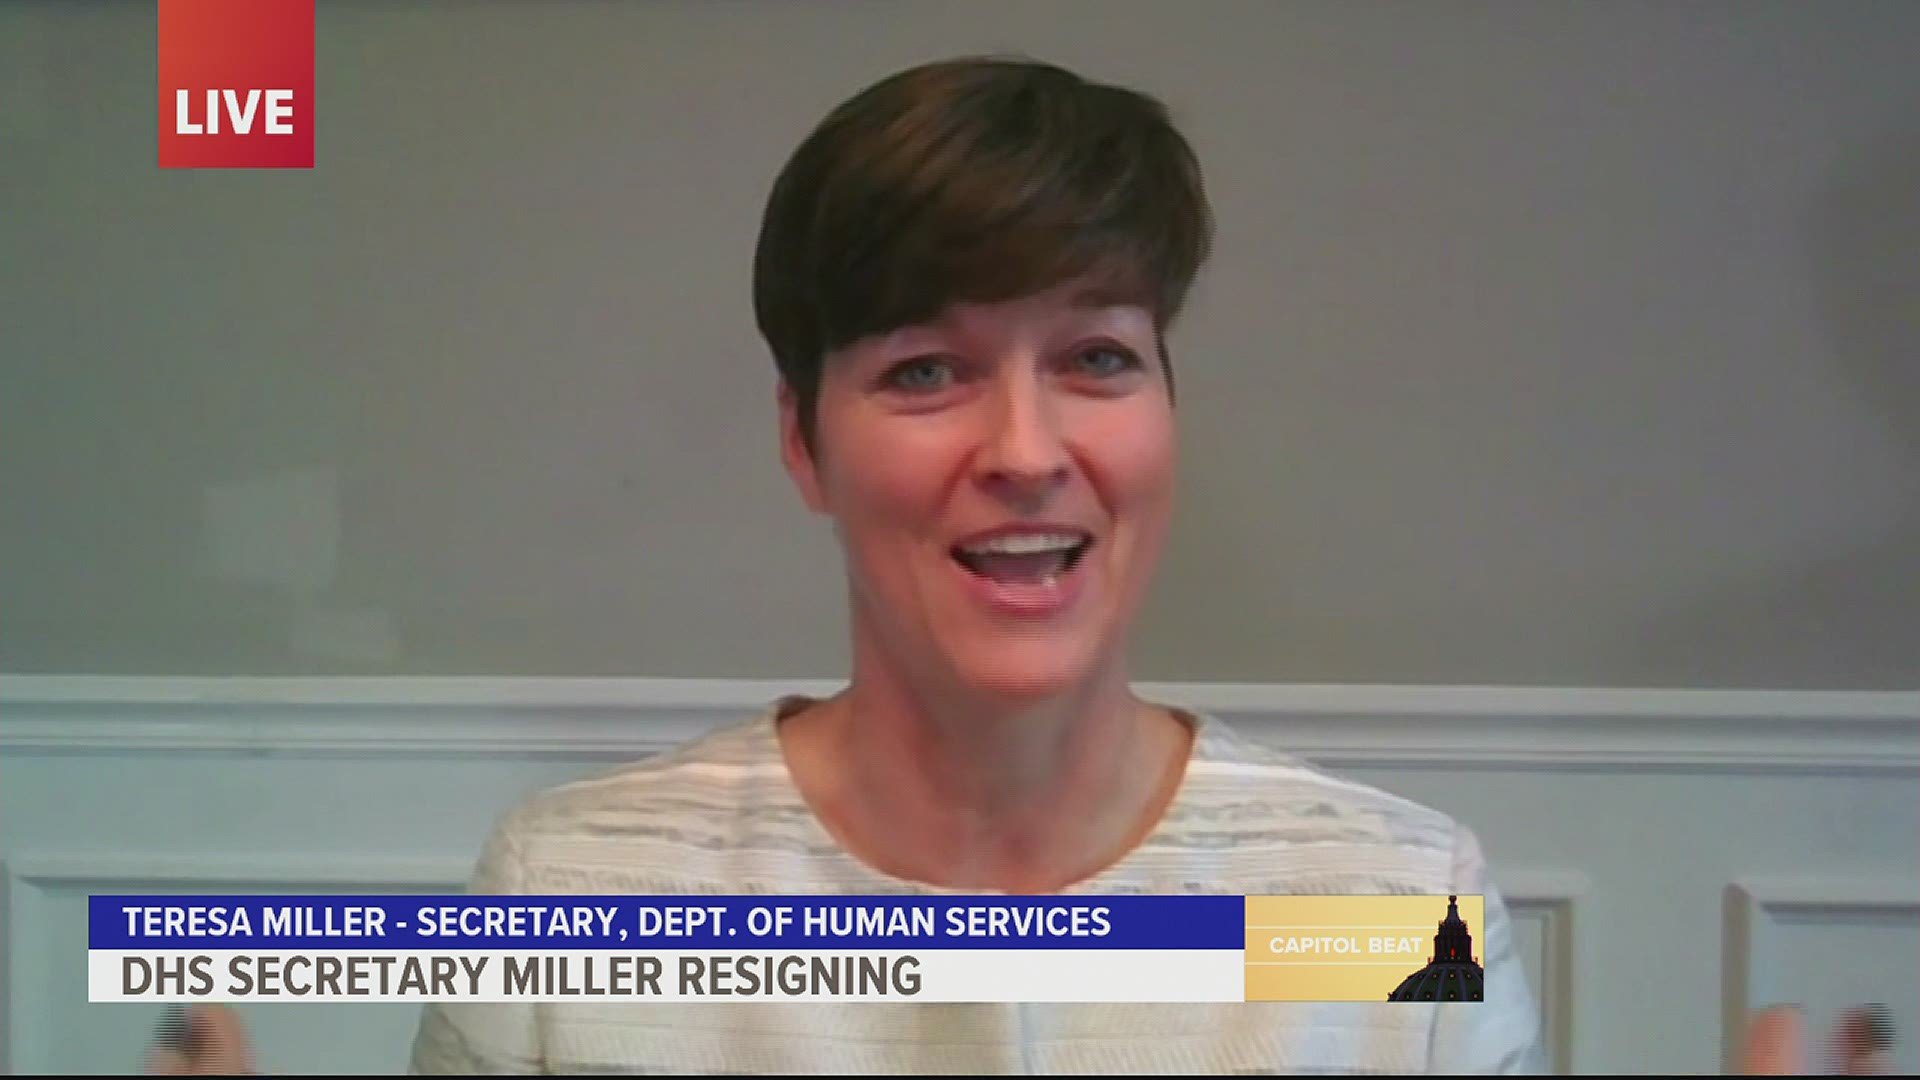 Miller, who has been in the Wolf Administration since 2015, and has served as Human Services secretary since 2017, will leave the department on April 30.